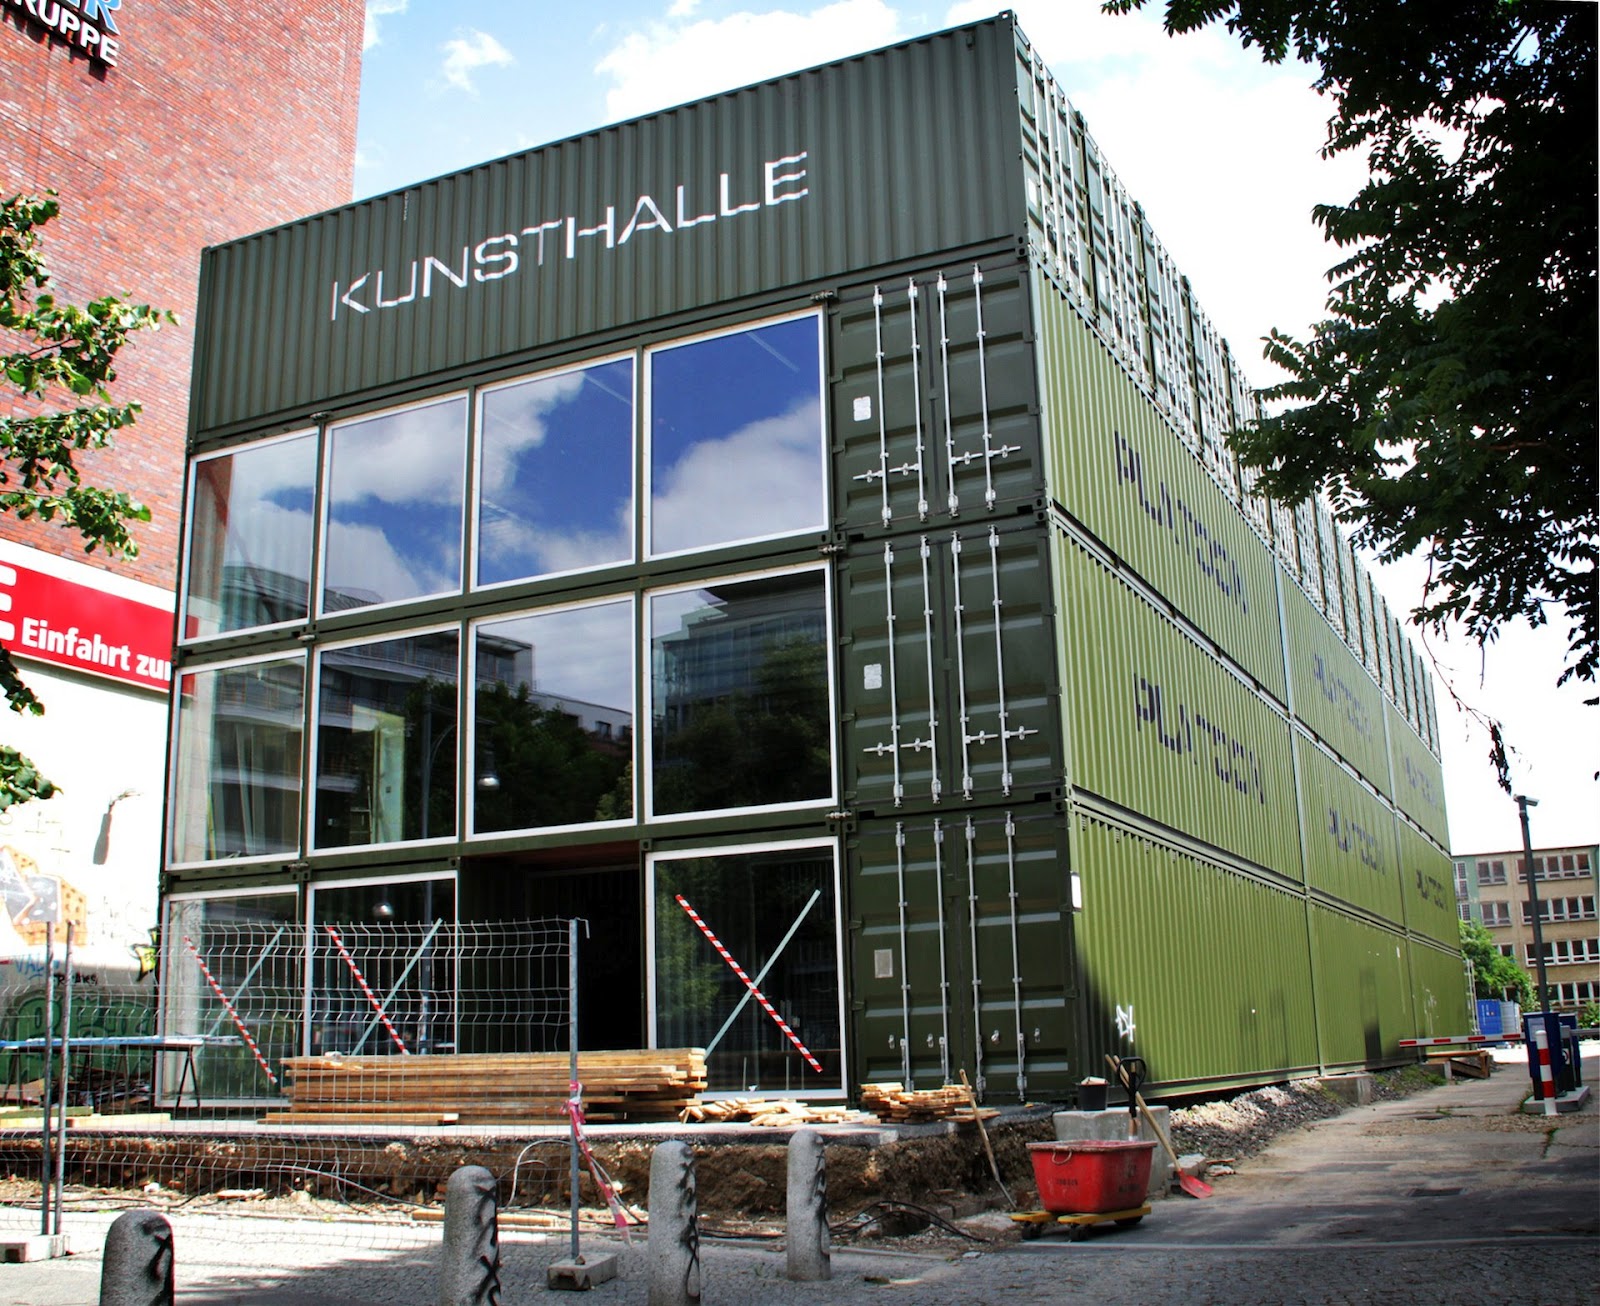 Shipping Container Homes: Platoon, Kunsthalle - Berlin 